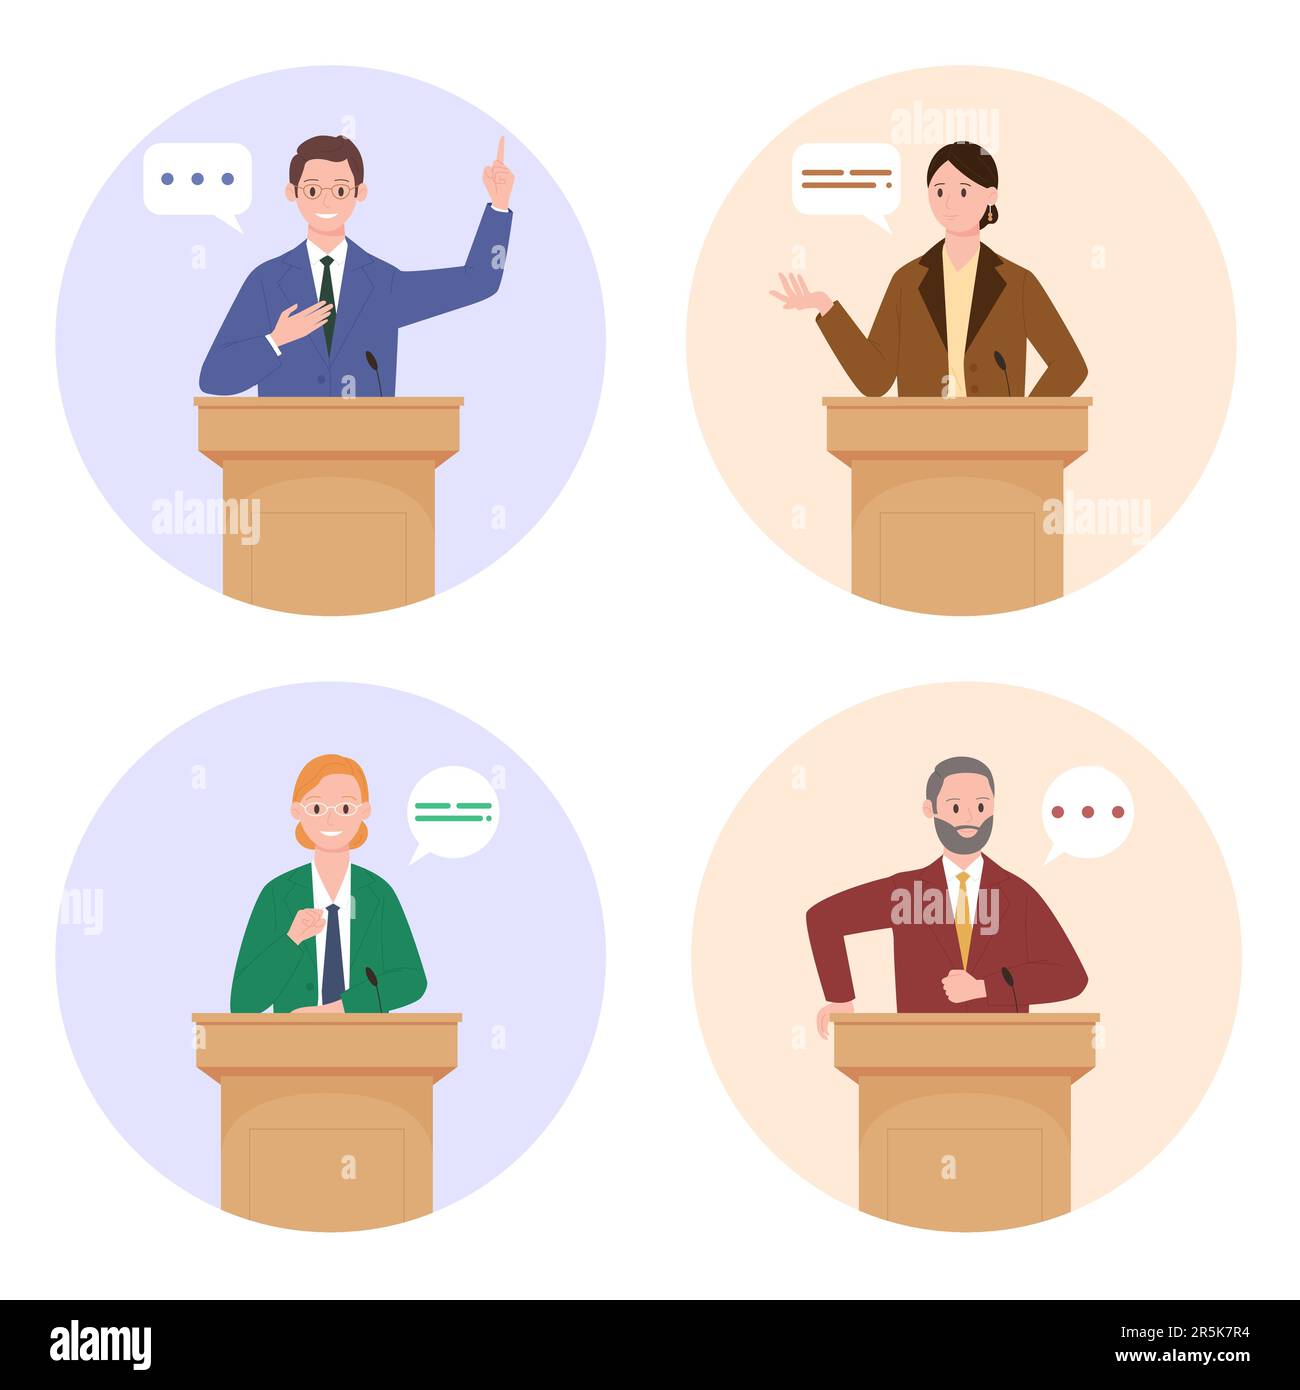 Politic public speech by politician on podium, circle icons set vector illustration. Cartoon male and female leaders in formal suits stand at tribune and agitate, characters speak at political debate Stock Vector